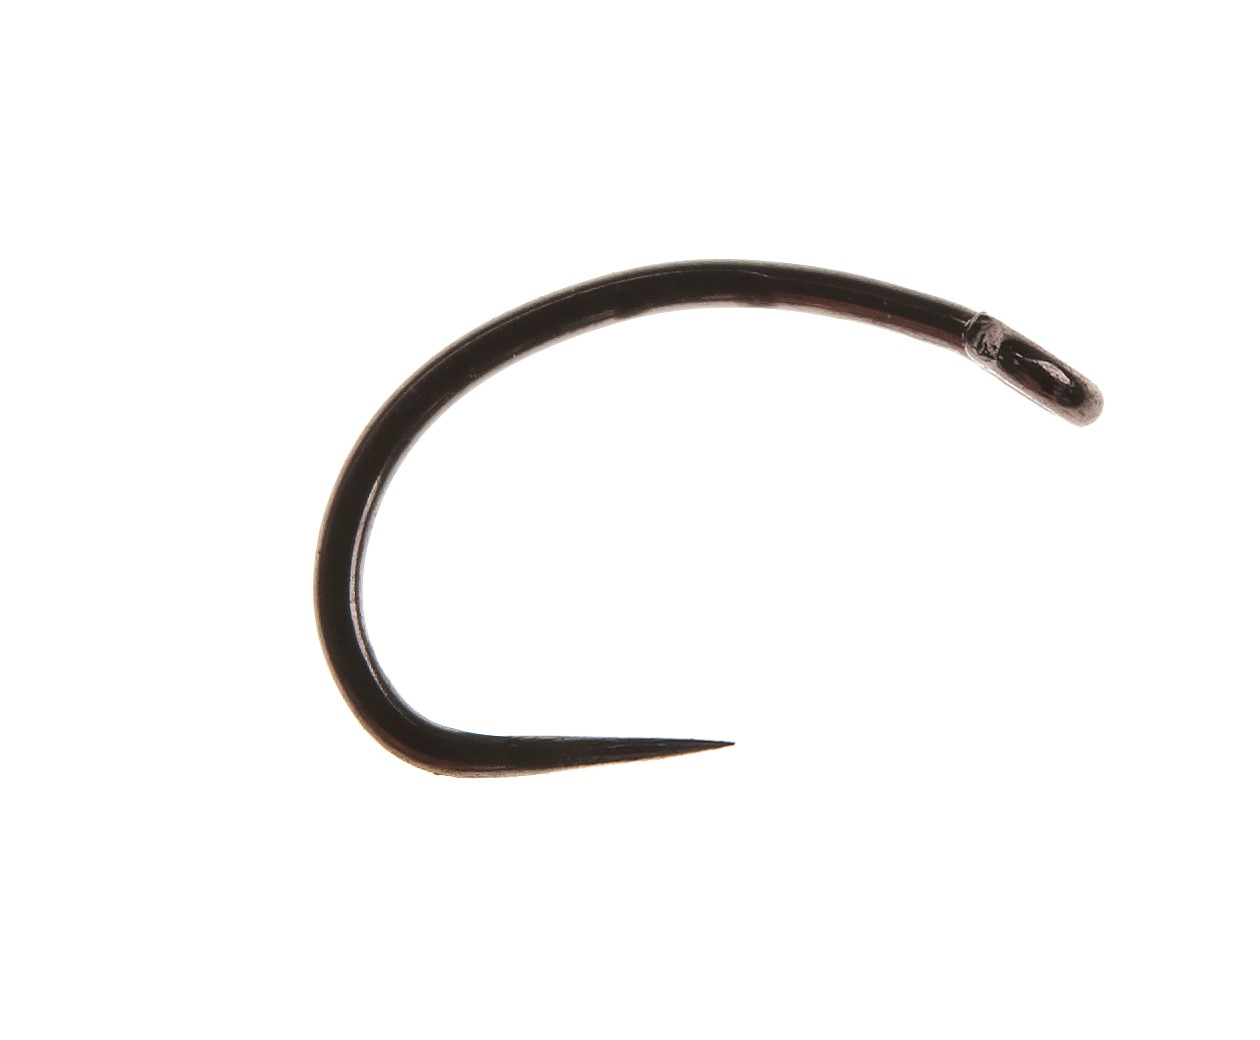 Ahrex FW525 Super Dry Barbless Hook #18